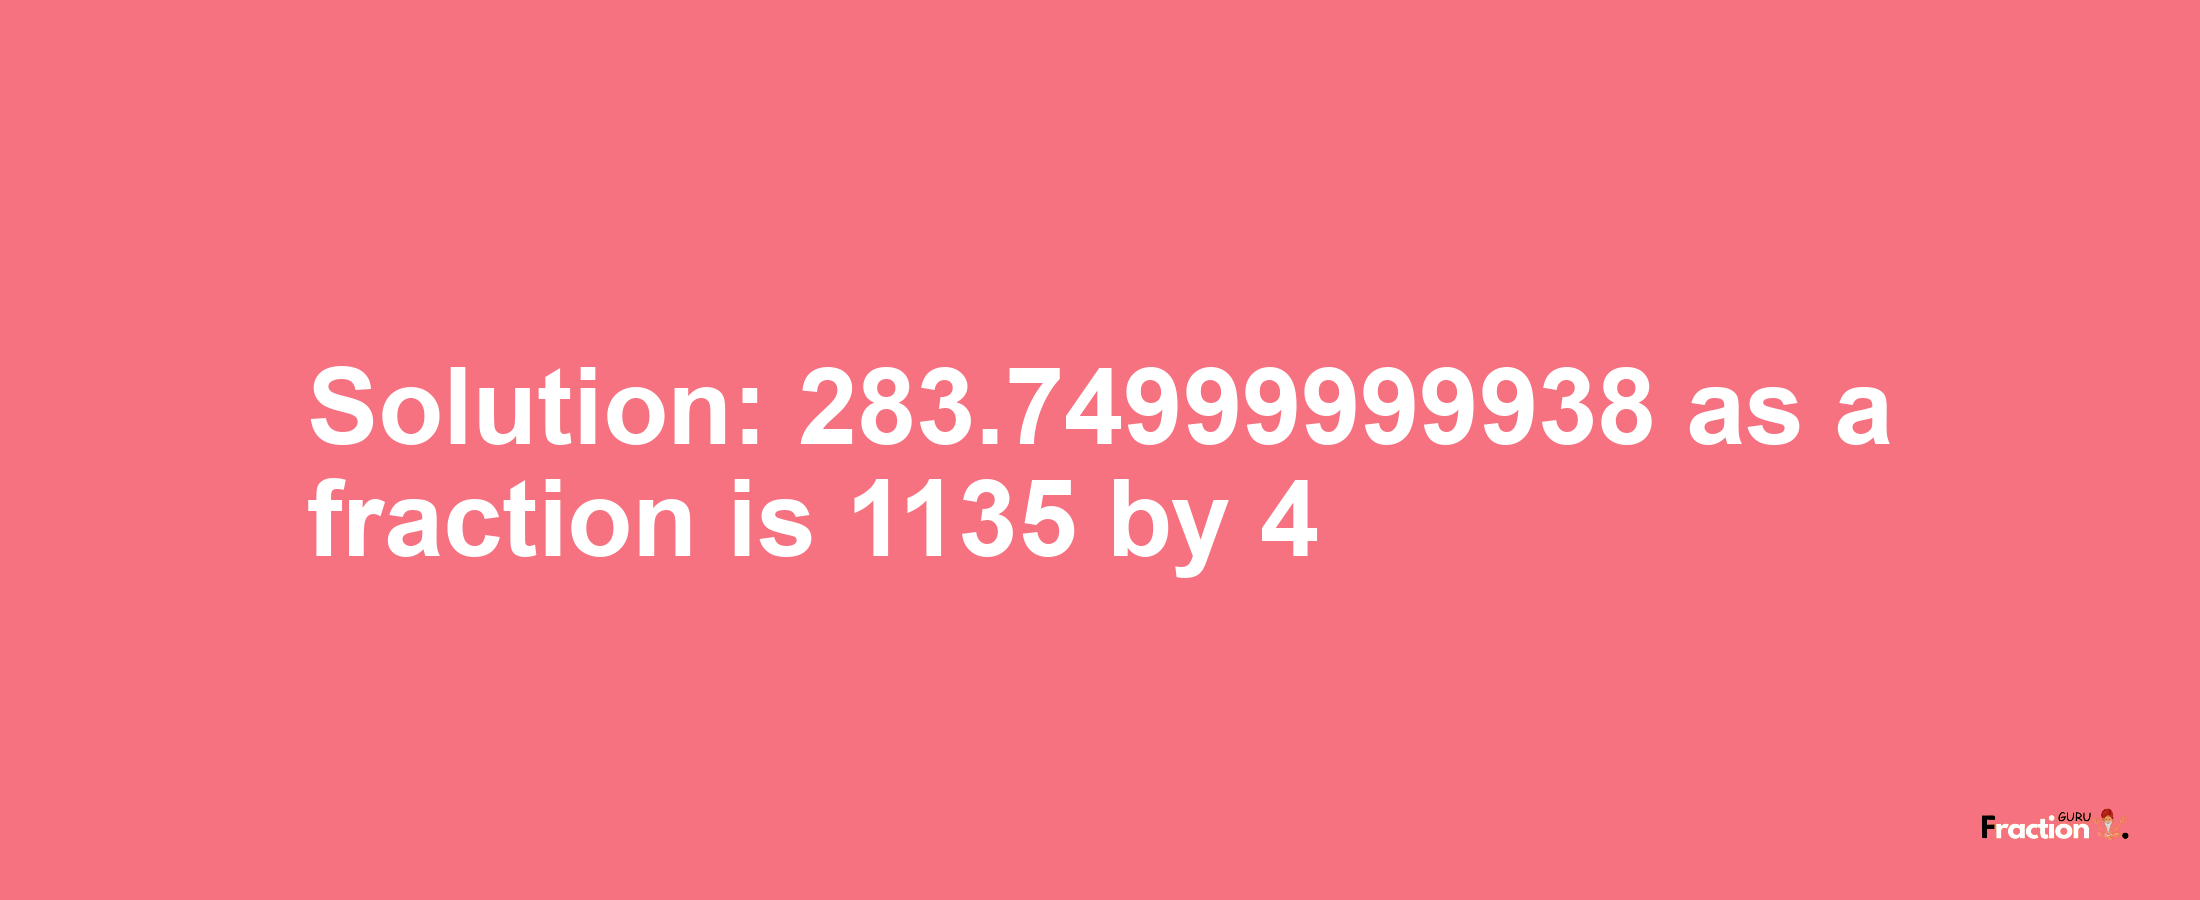 Solution:283.74999999938 as a fraction is 1135/4